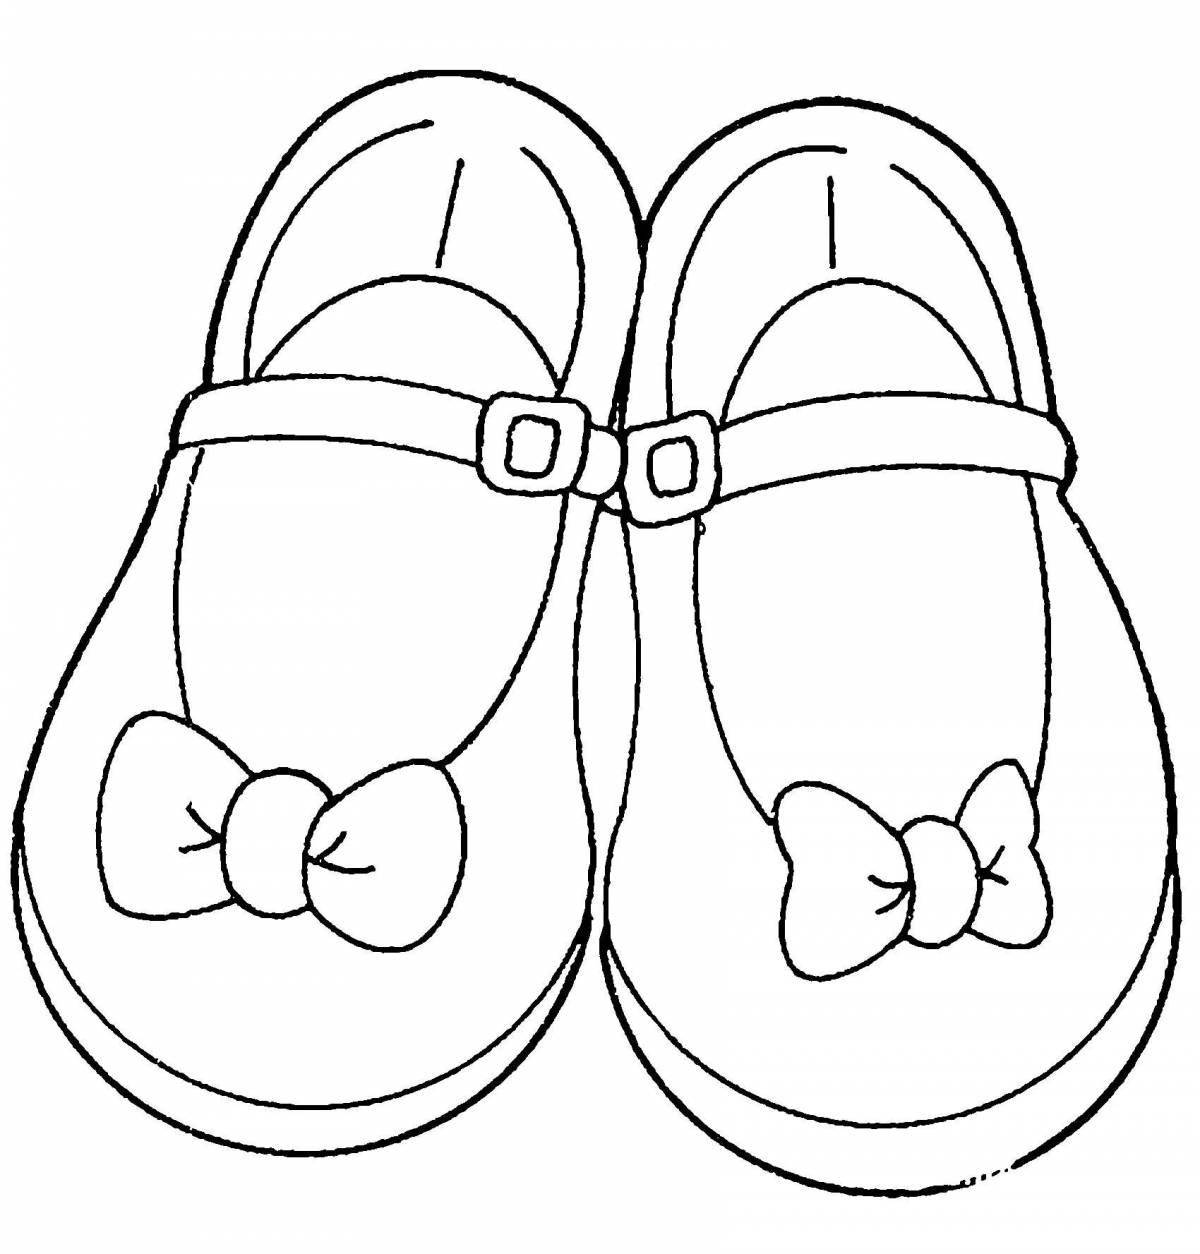 Coloring book shiny shoes for children